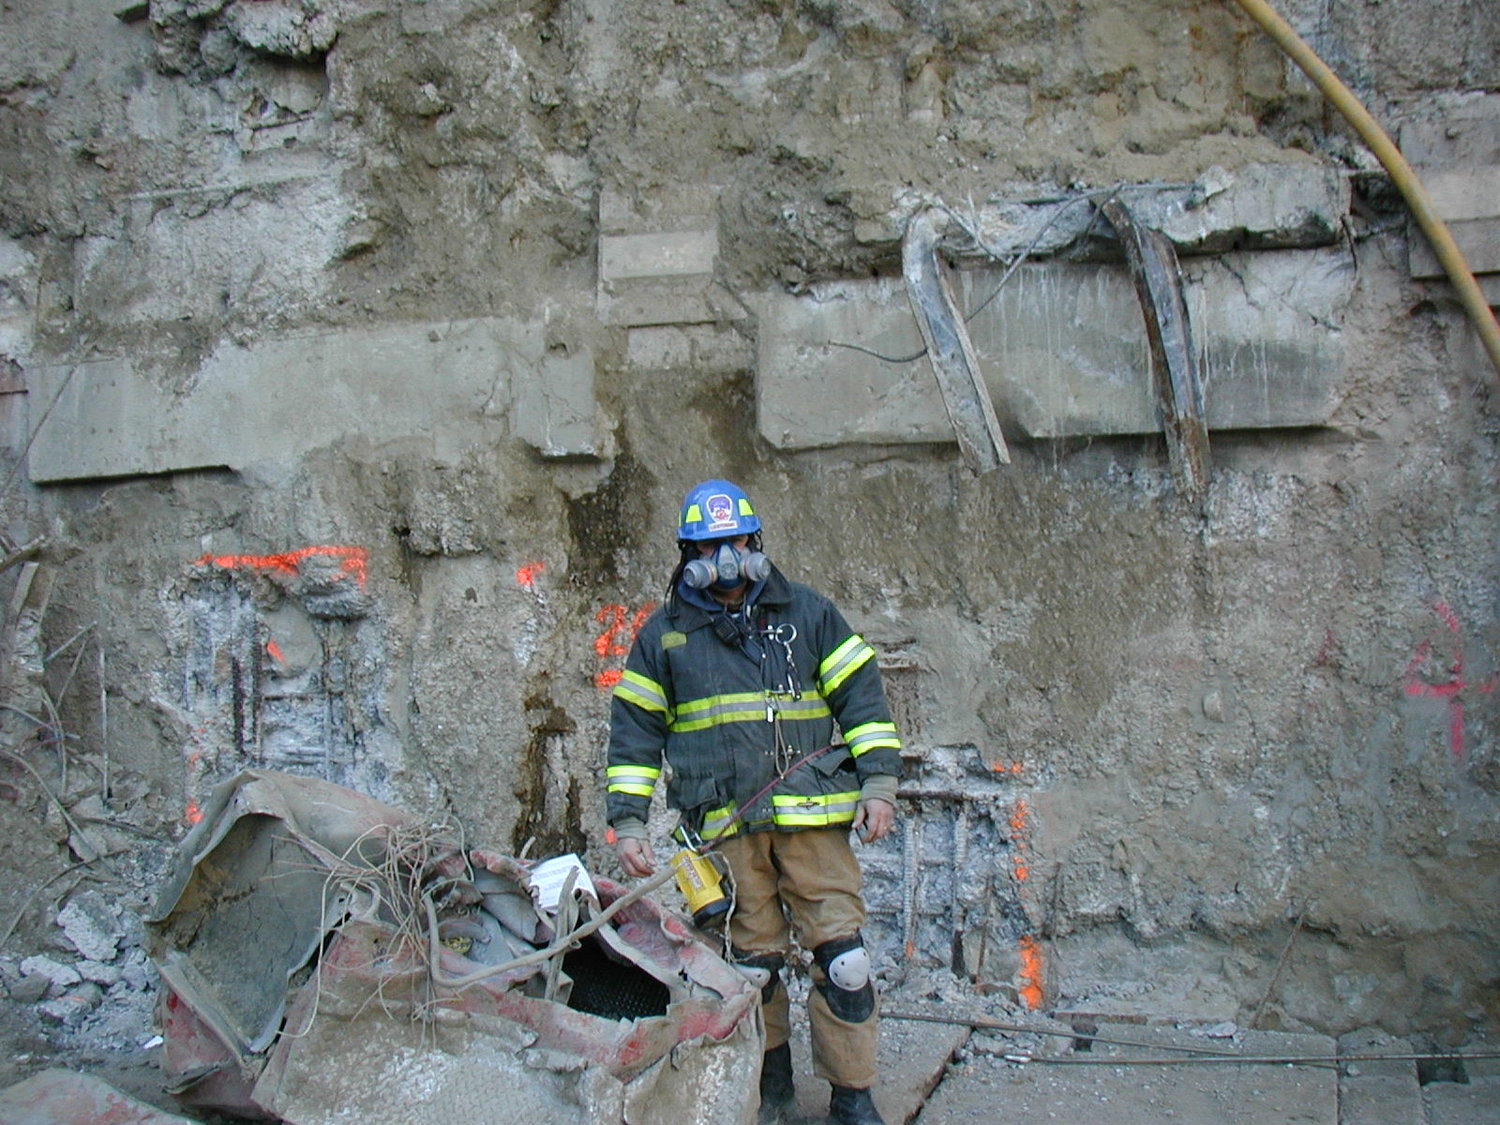 Fuchs spent the month of December 2001 searching the rubble at ground zero.